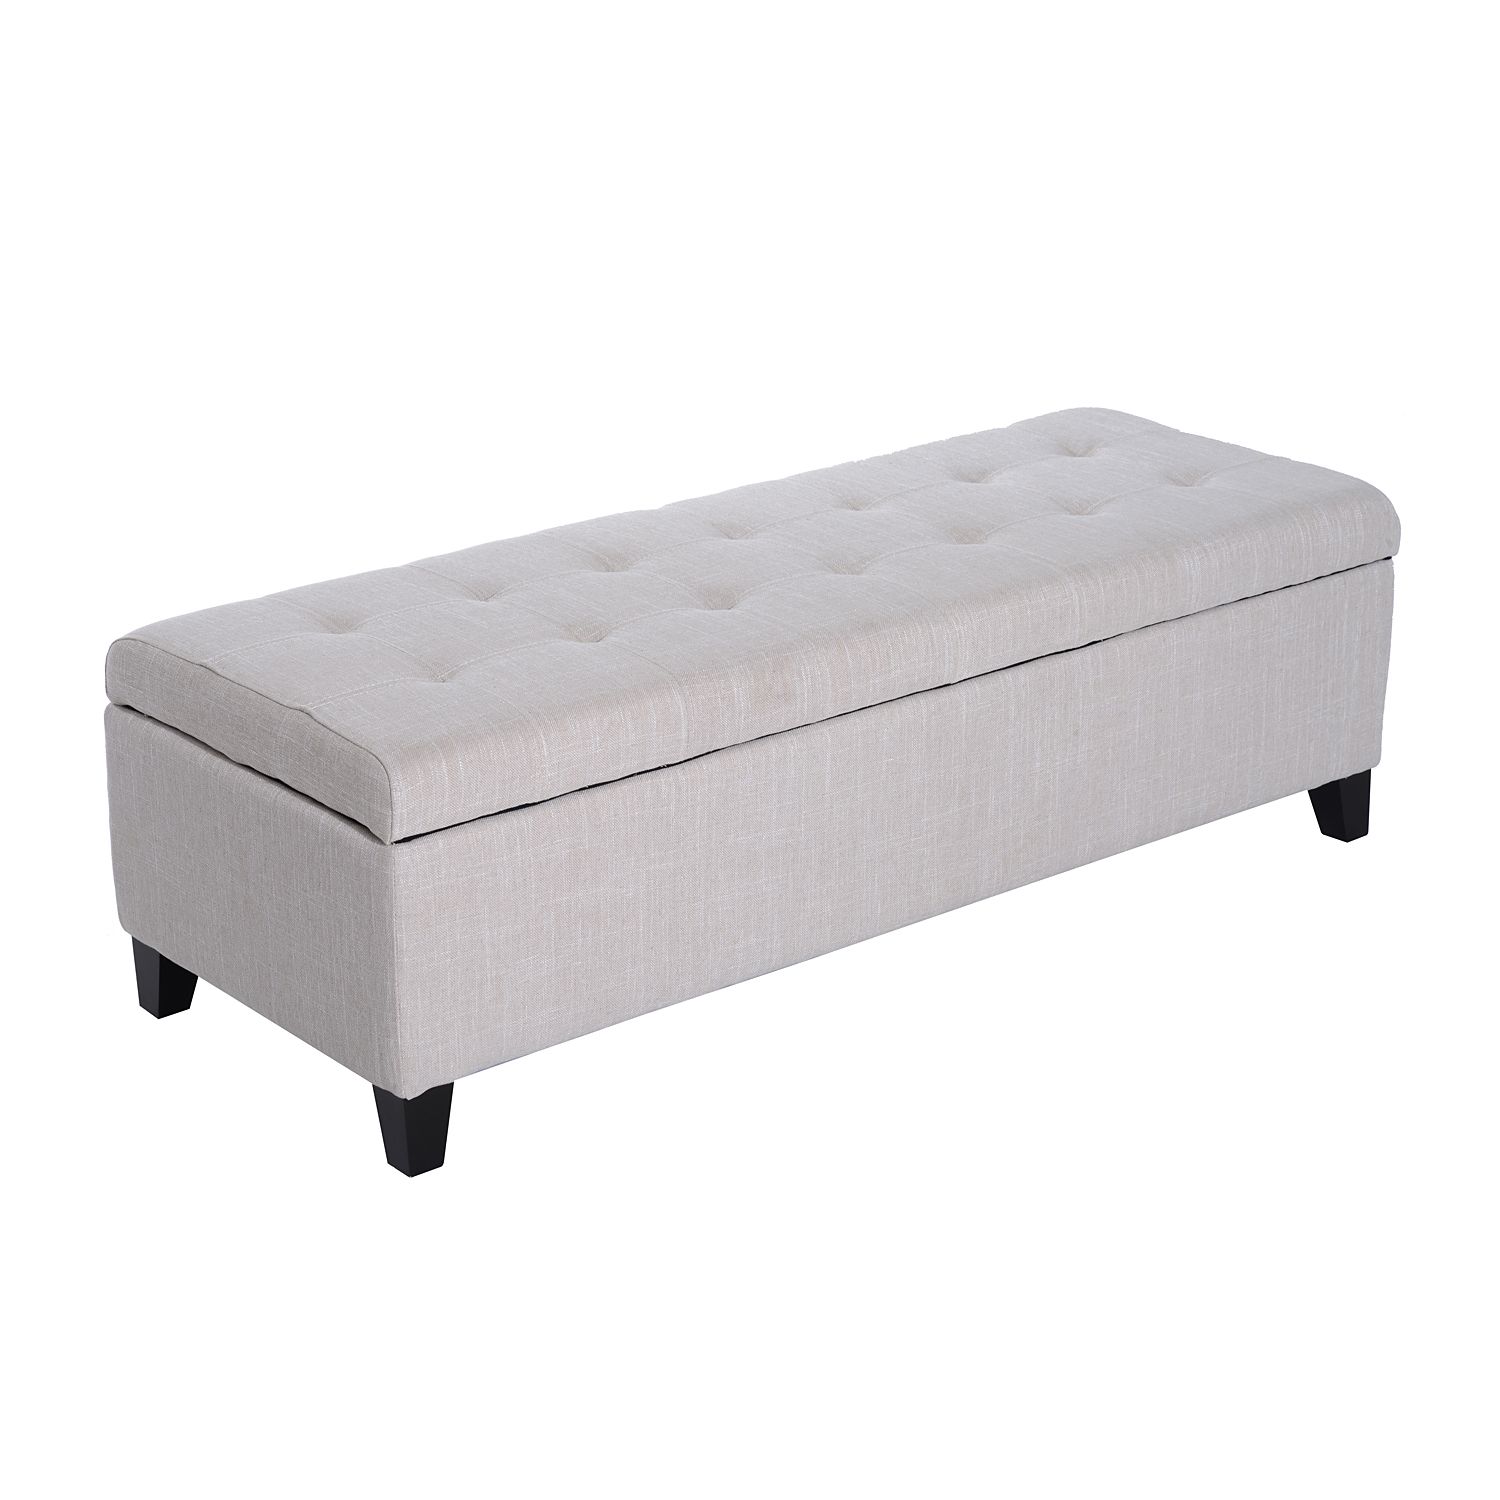 Large 51" Tufted Linen Fabric Ottoman Storage Bench – Cream White Within Linen Fabric Tufted Surfboard Ottomans (View 16 of 20)